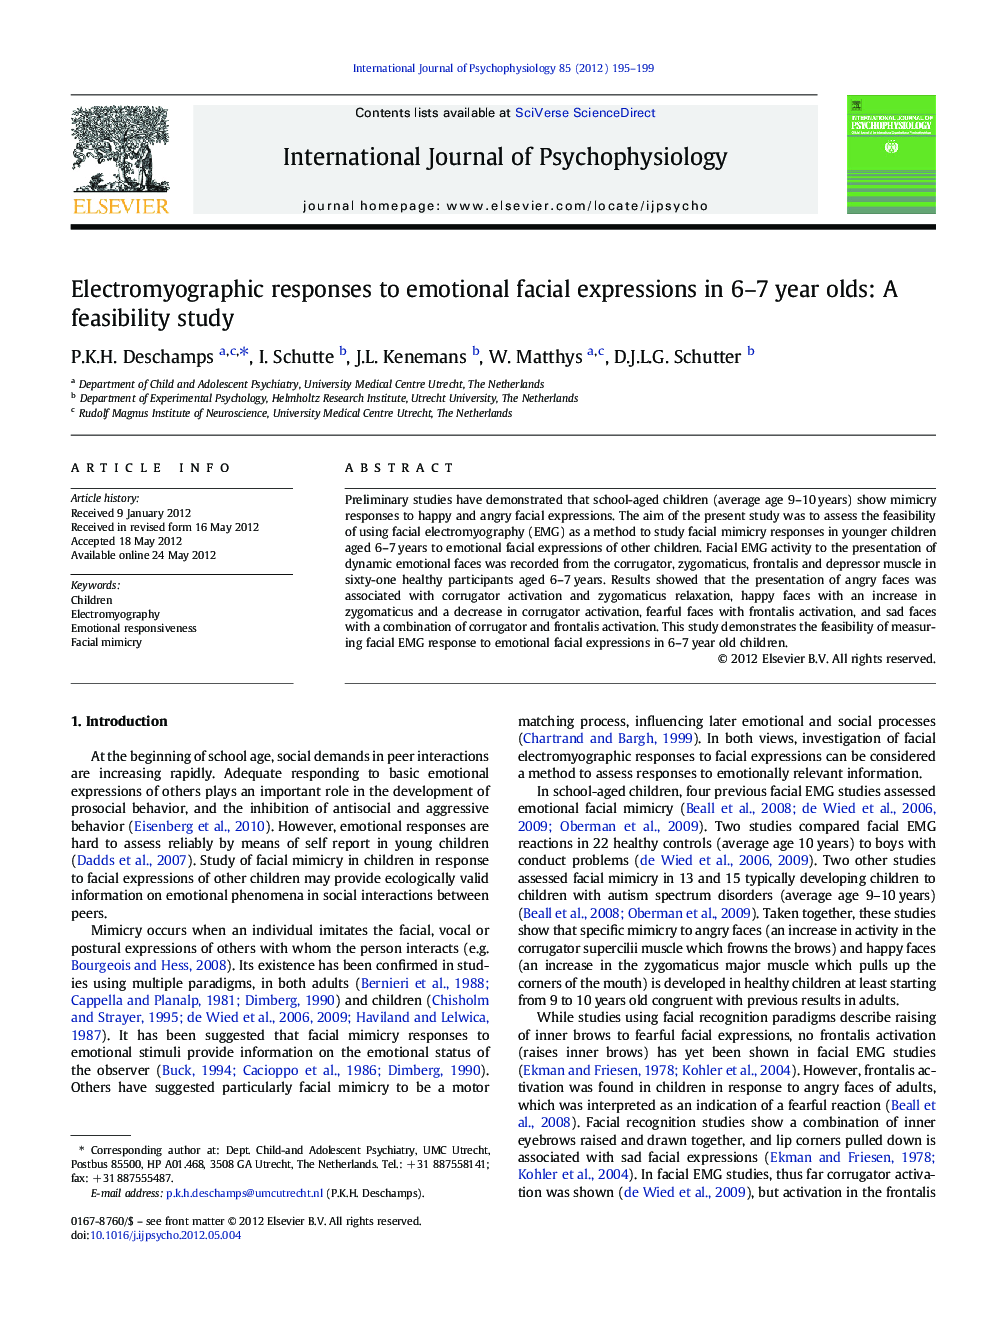 Electromyographic responses to emotional facial expressions in 6–7 year olds: A feasibility study